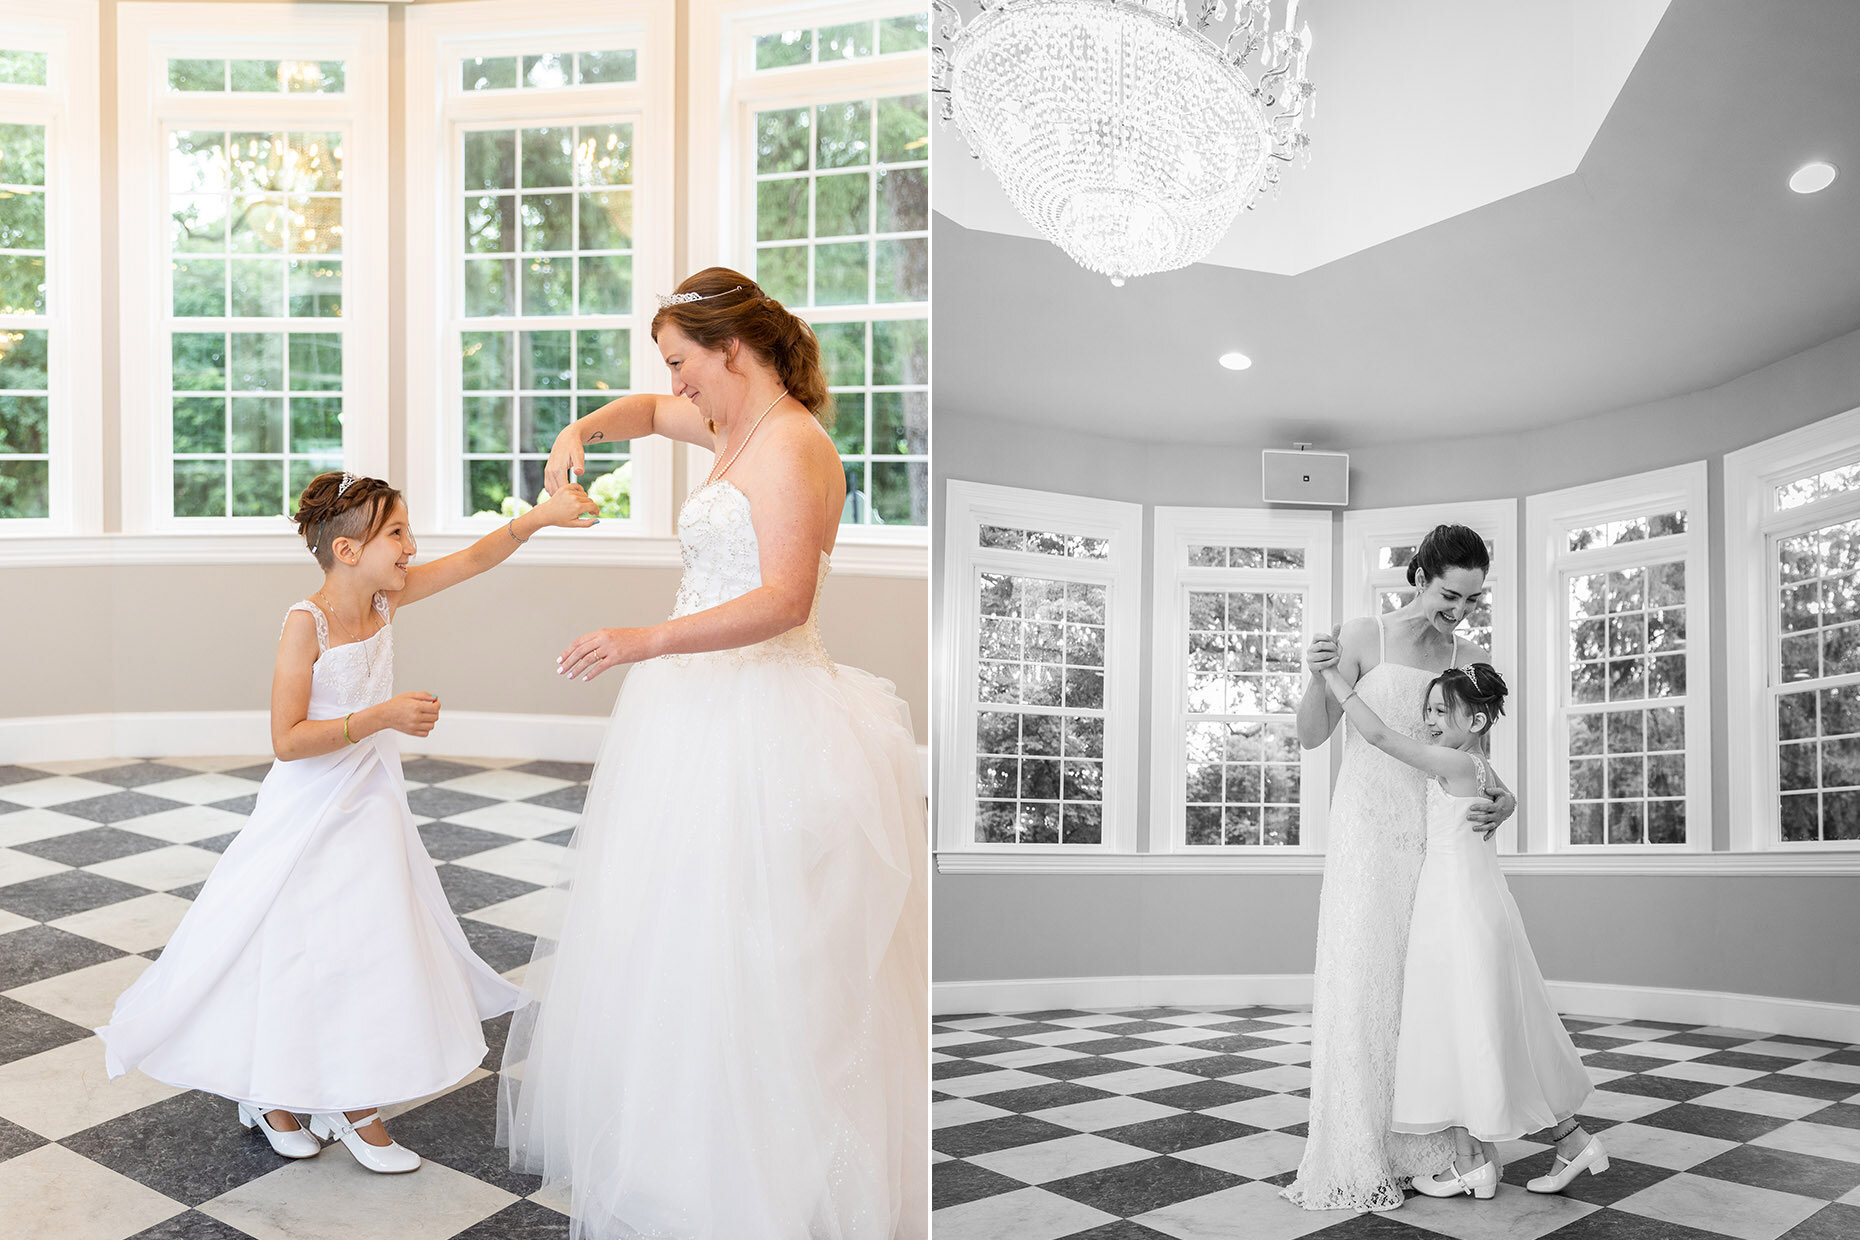 Mother Daughter Dances at Reception